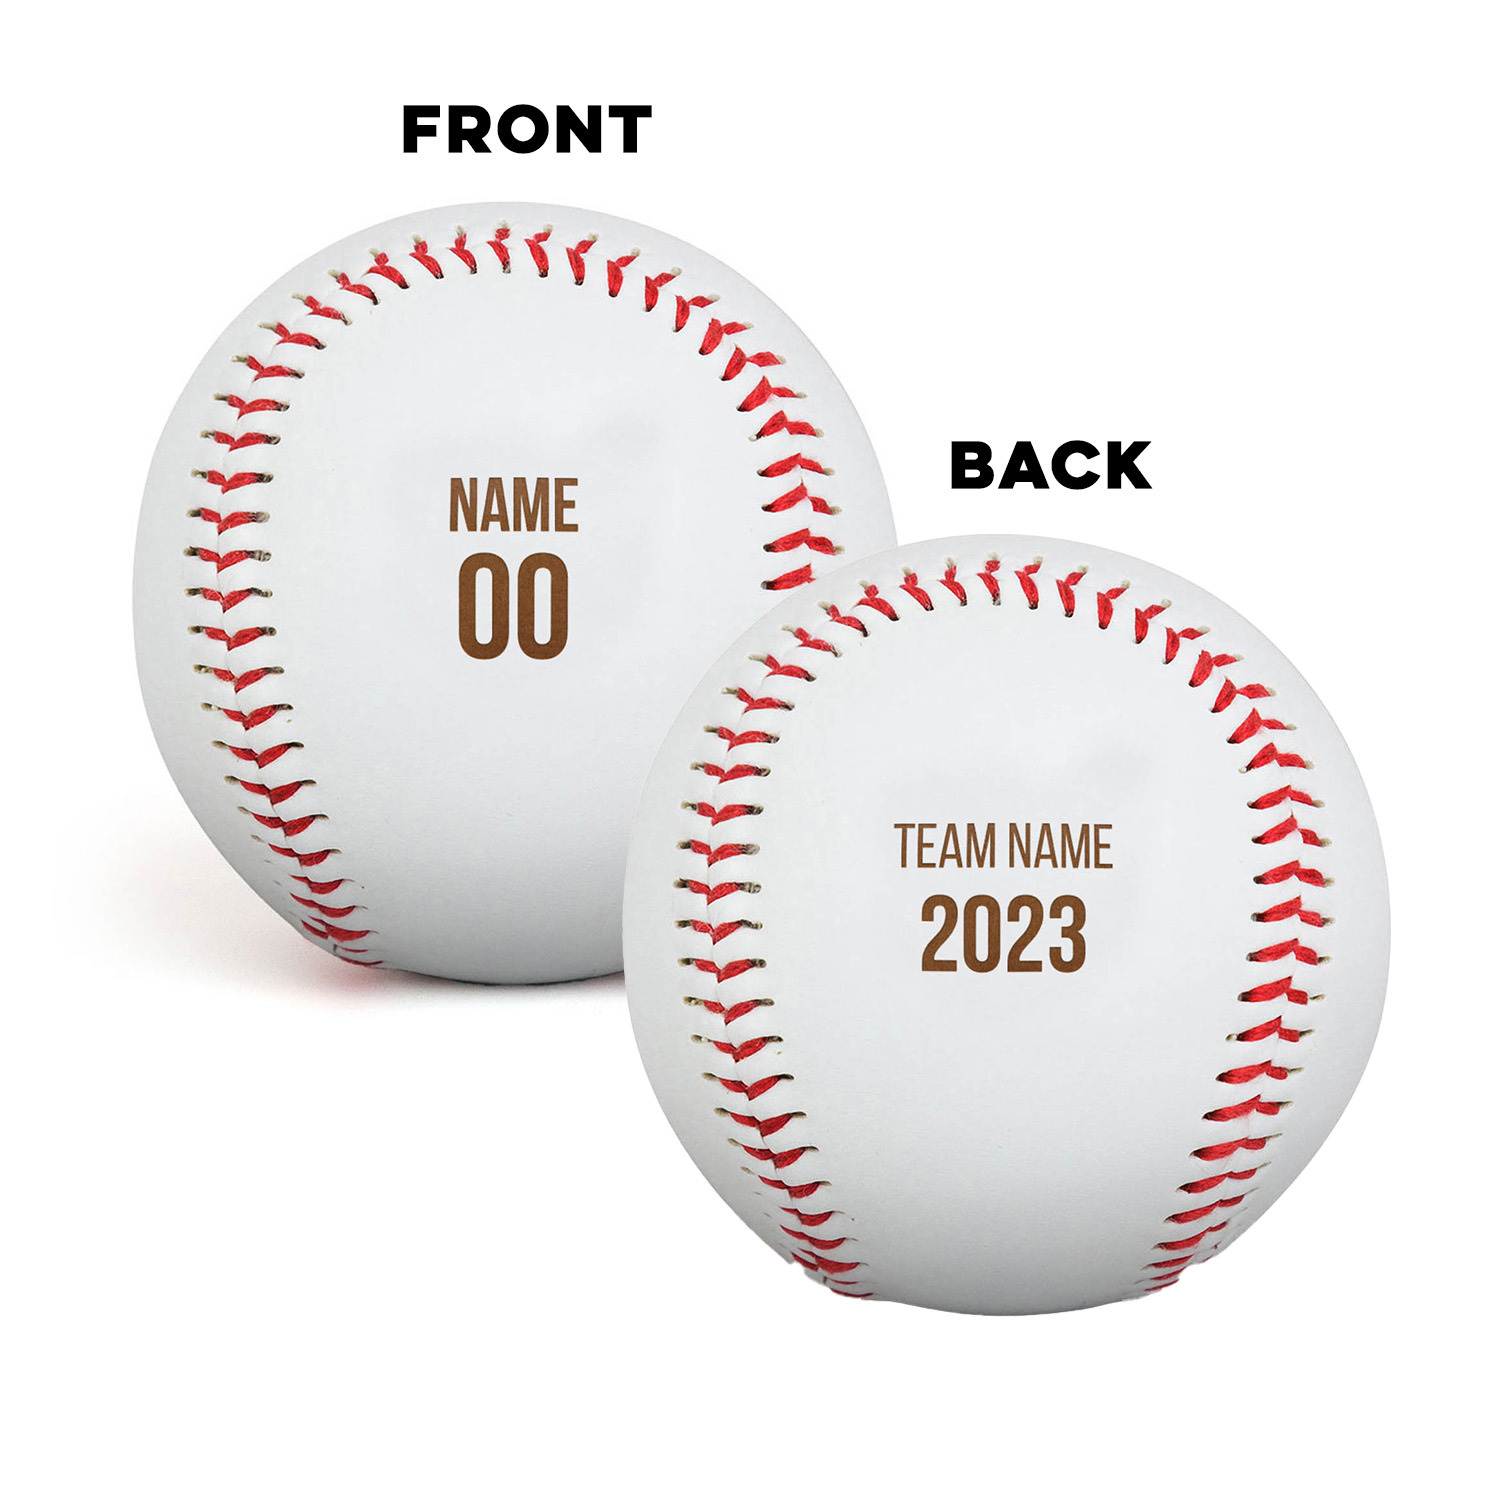 Engraved Baseball Front/Back - Player and Team Information - Personalization Image